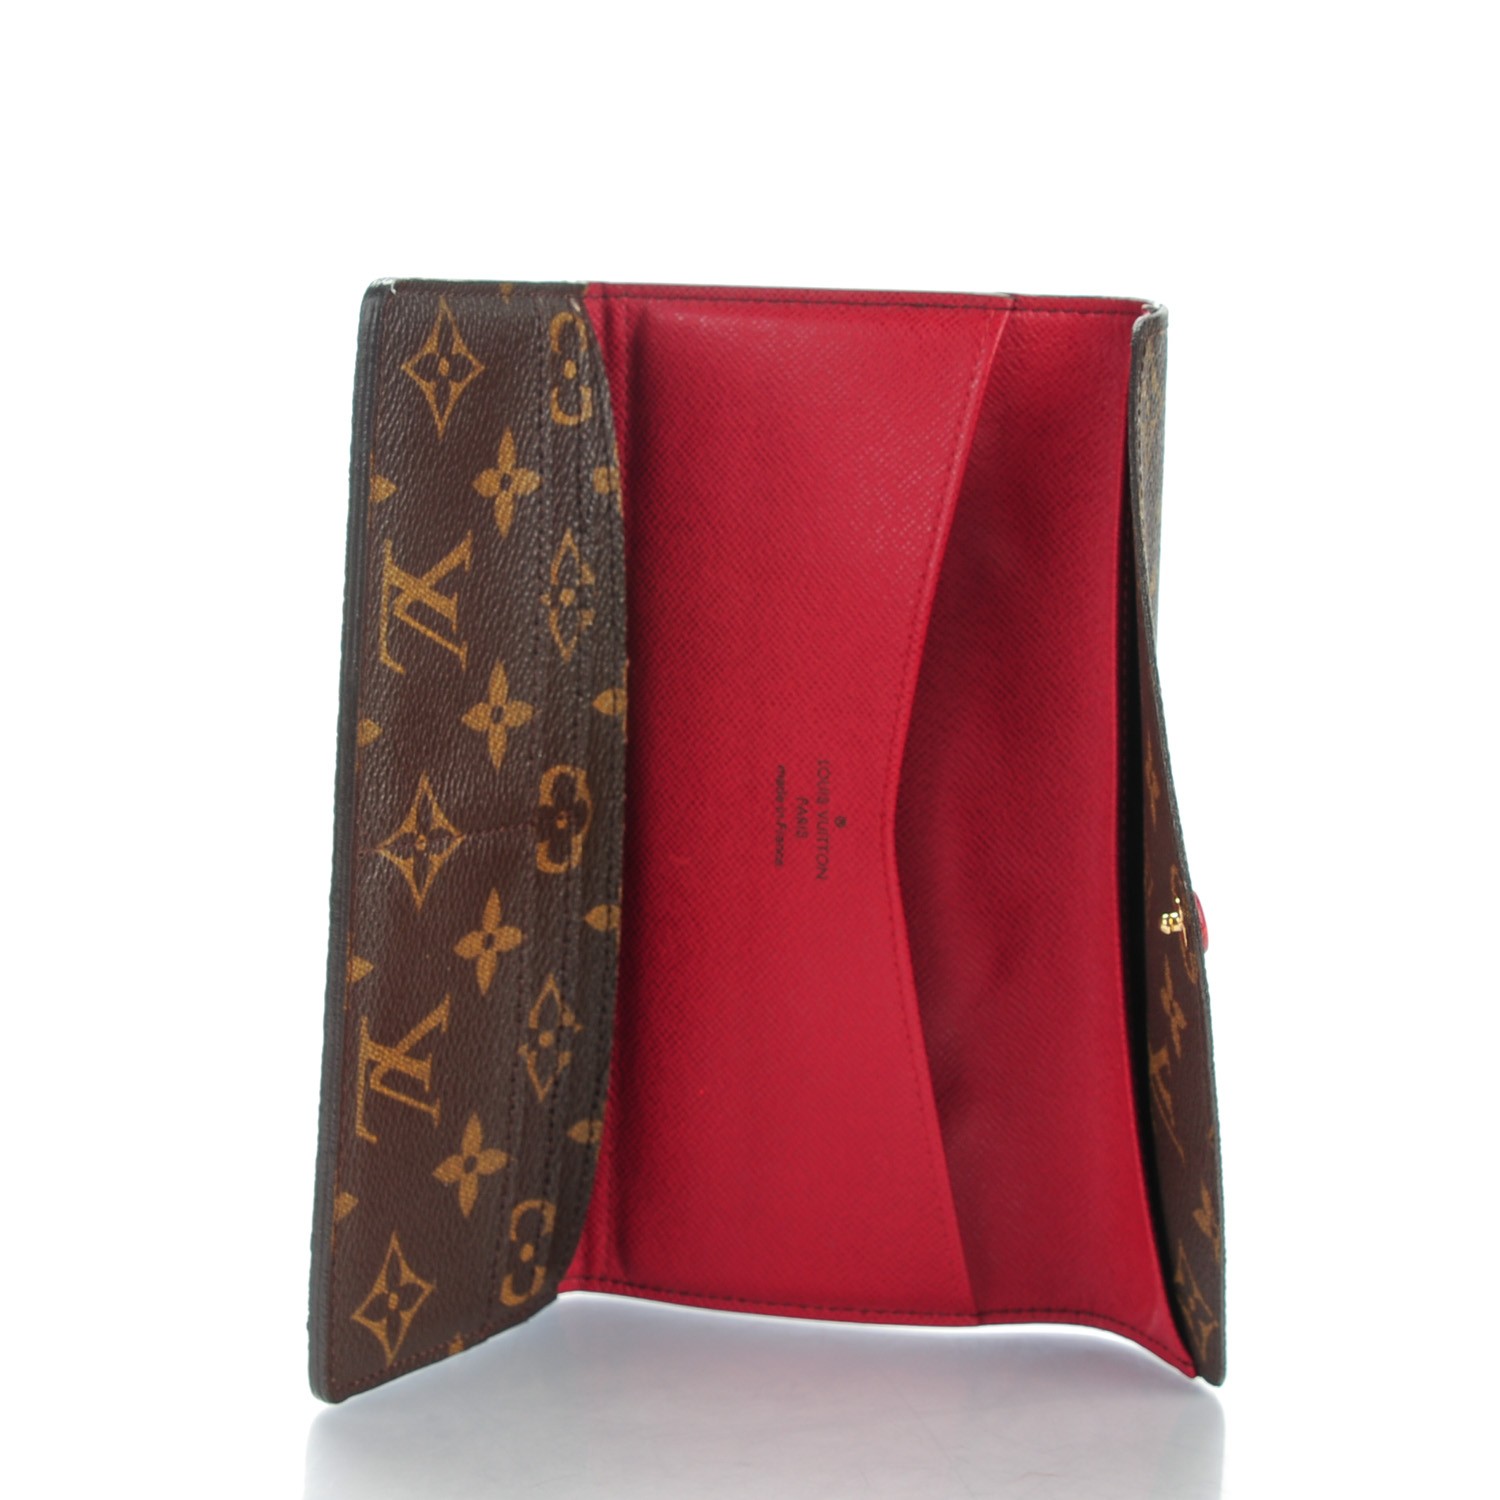 ✨LOUIS VUITTON✨ Josephine Wallet Selling $600 Discontinued in